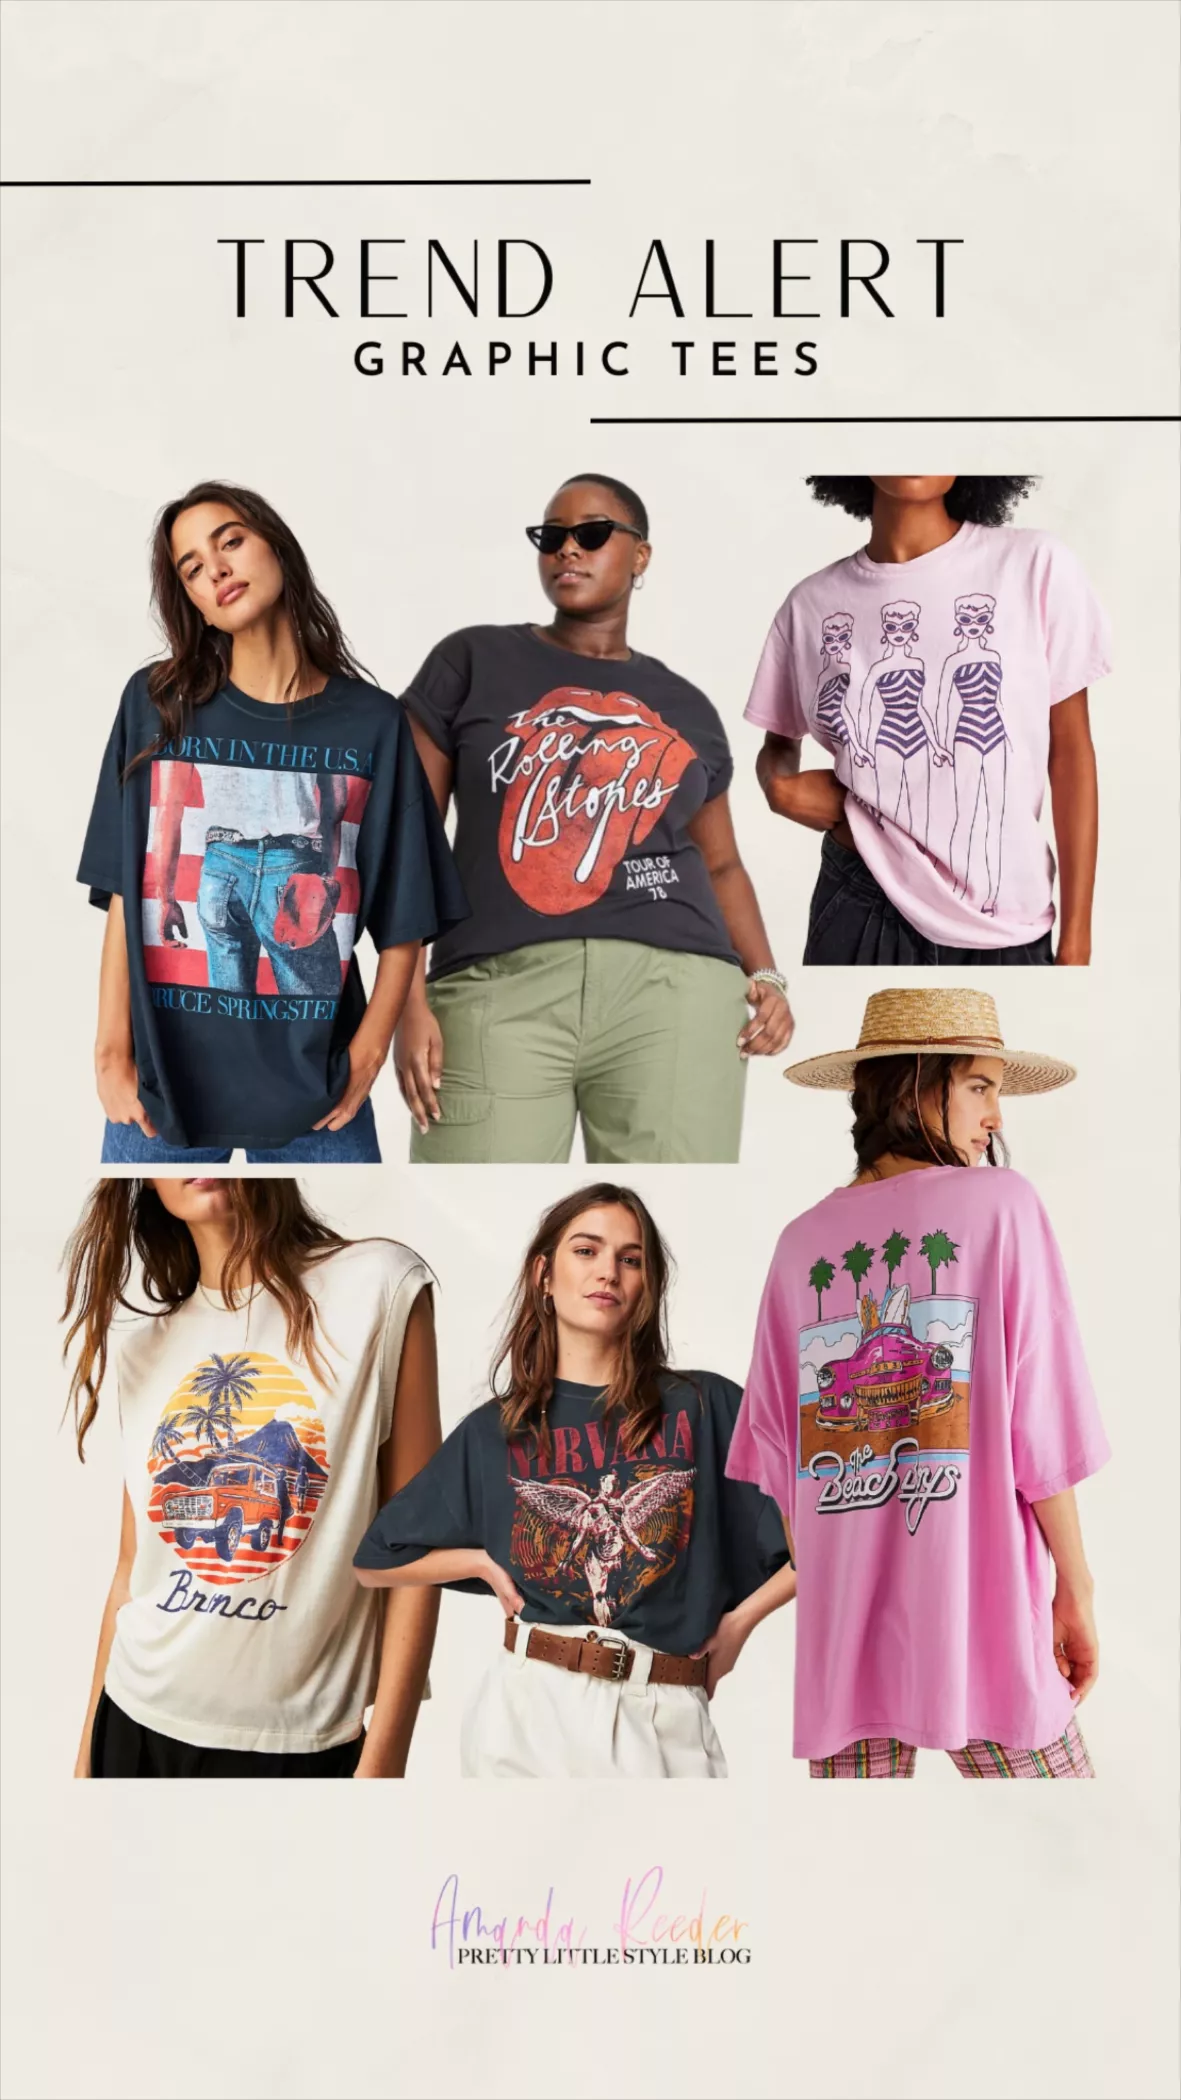 Summer Trend: The Graphic Tee